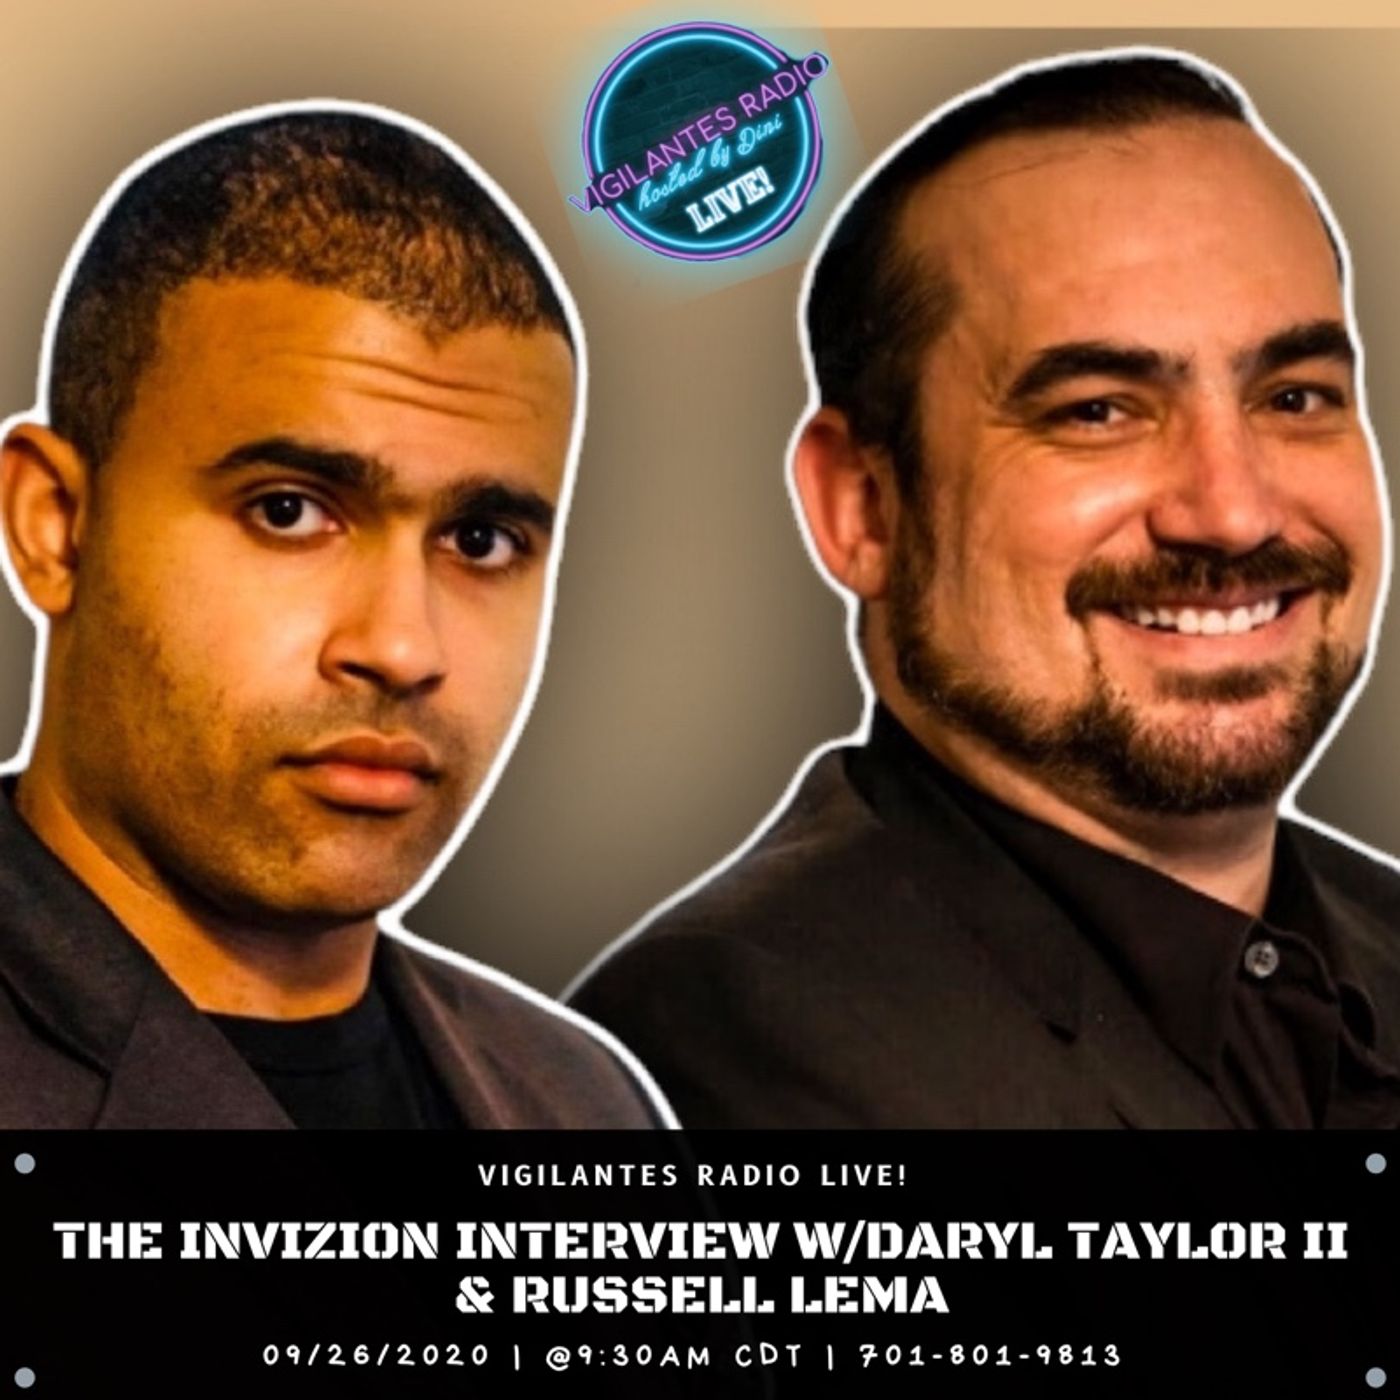 The Invizion Interview w/Daryl Taylor II & Russell Lema.